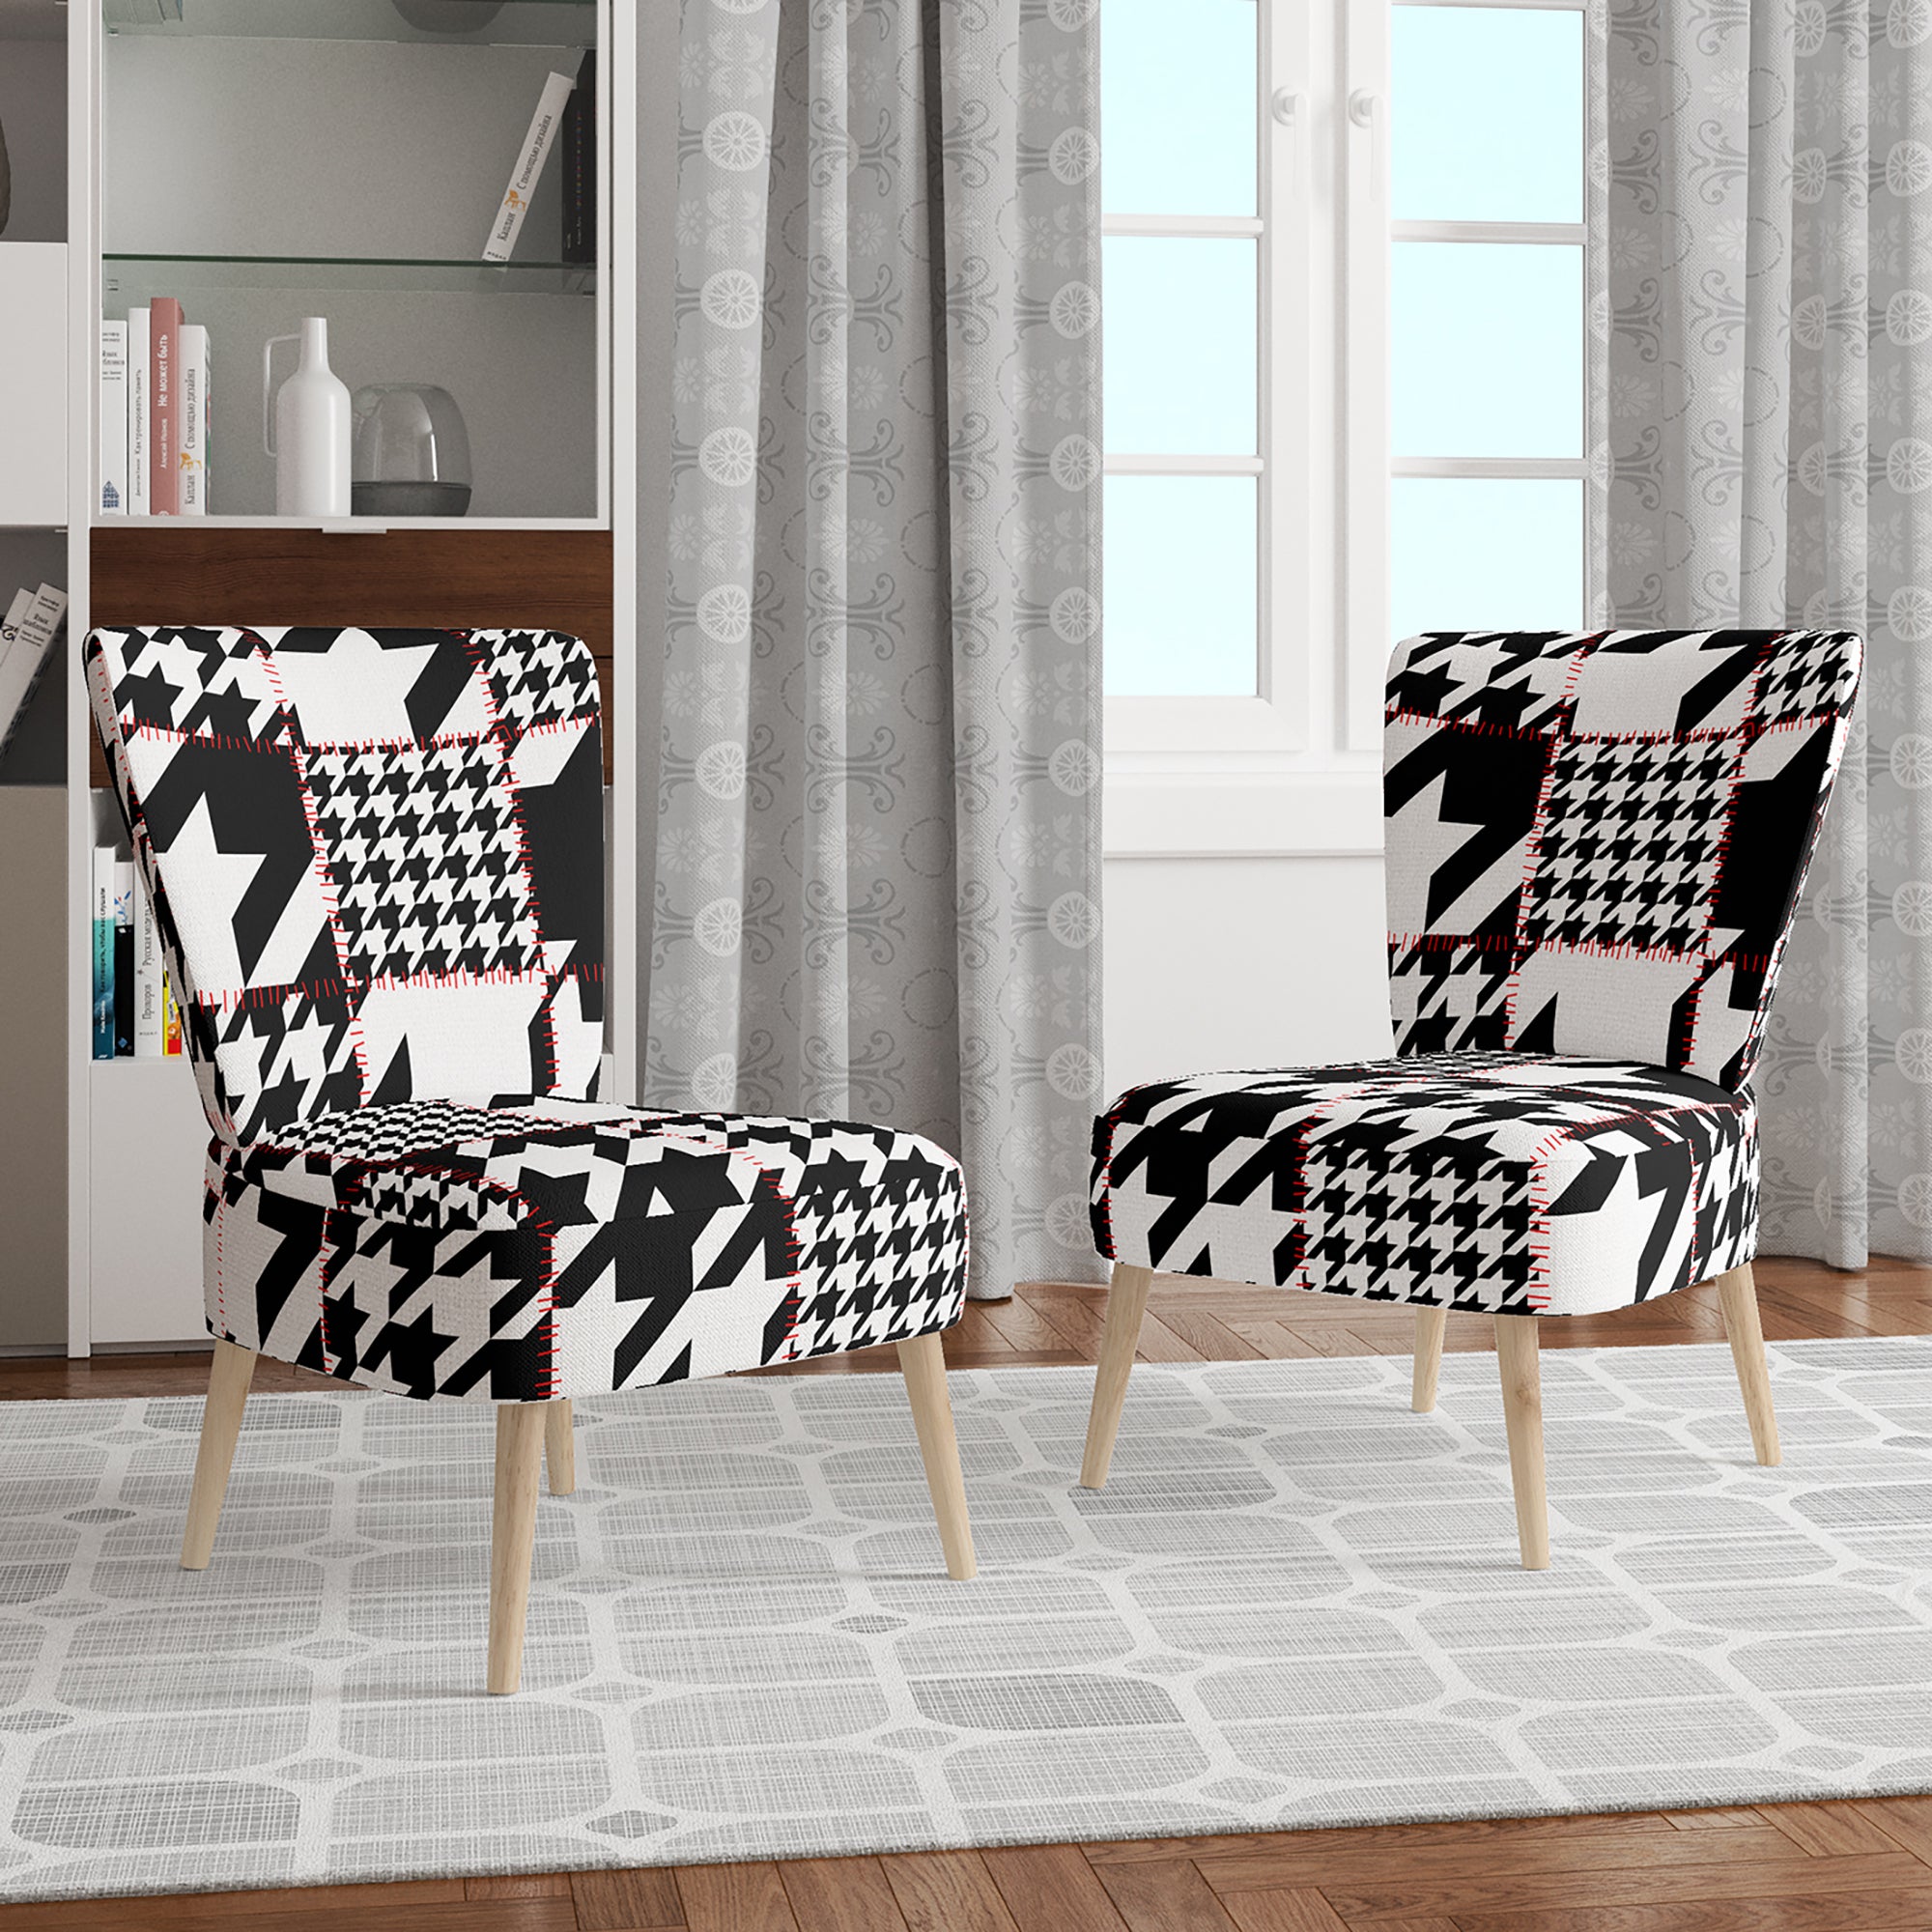 Designart 'Classic Houndstooth Pattern' Mid-Century Accent Chair